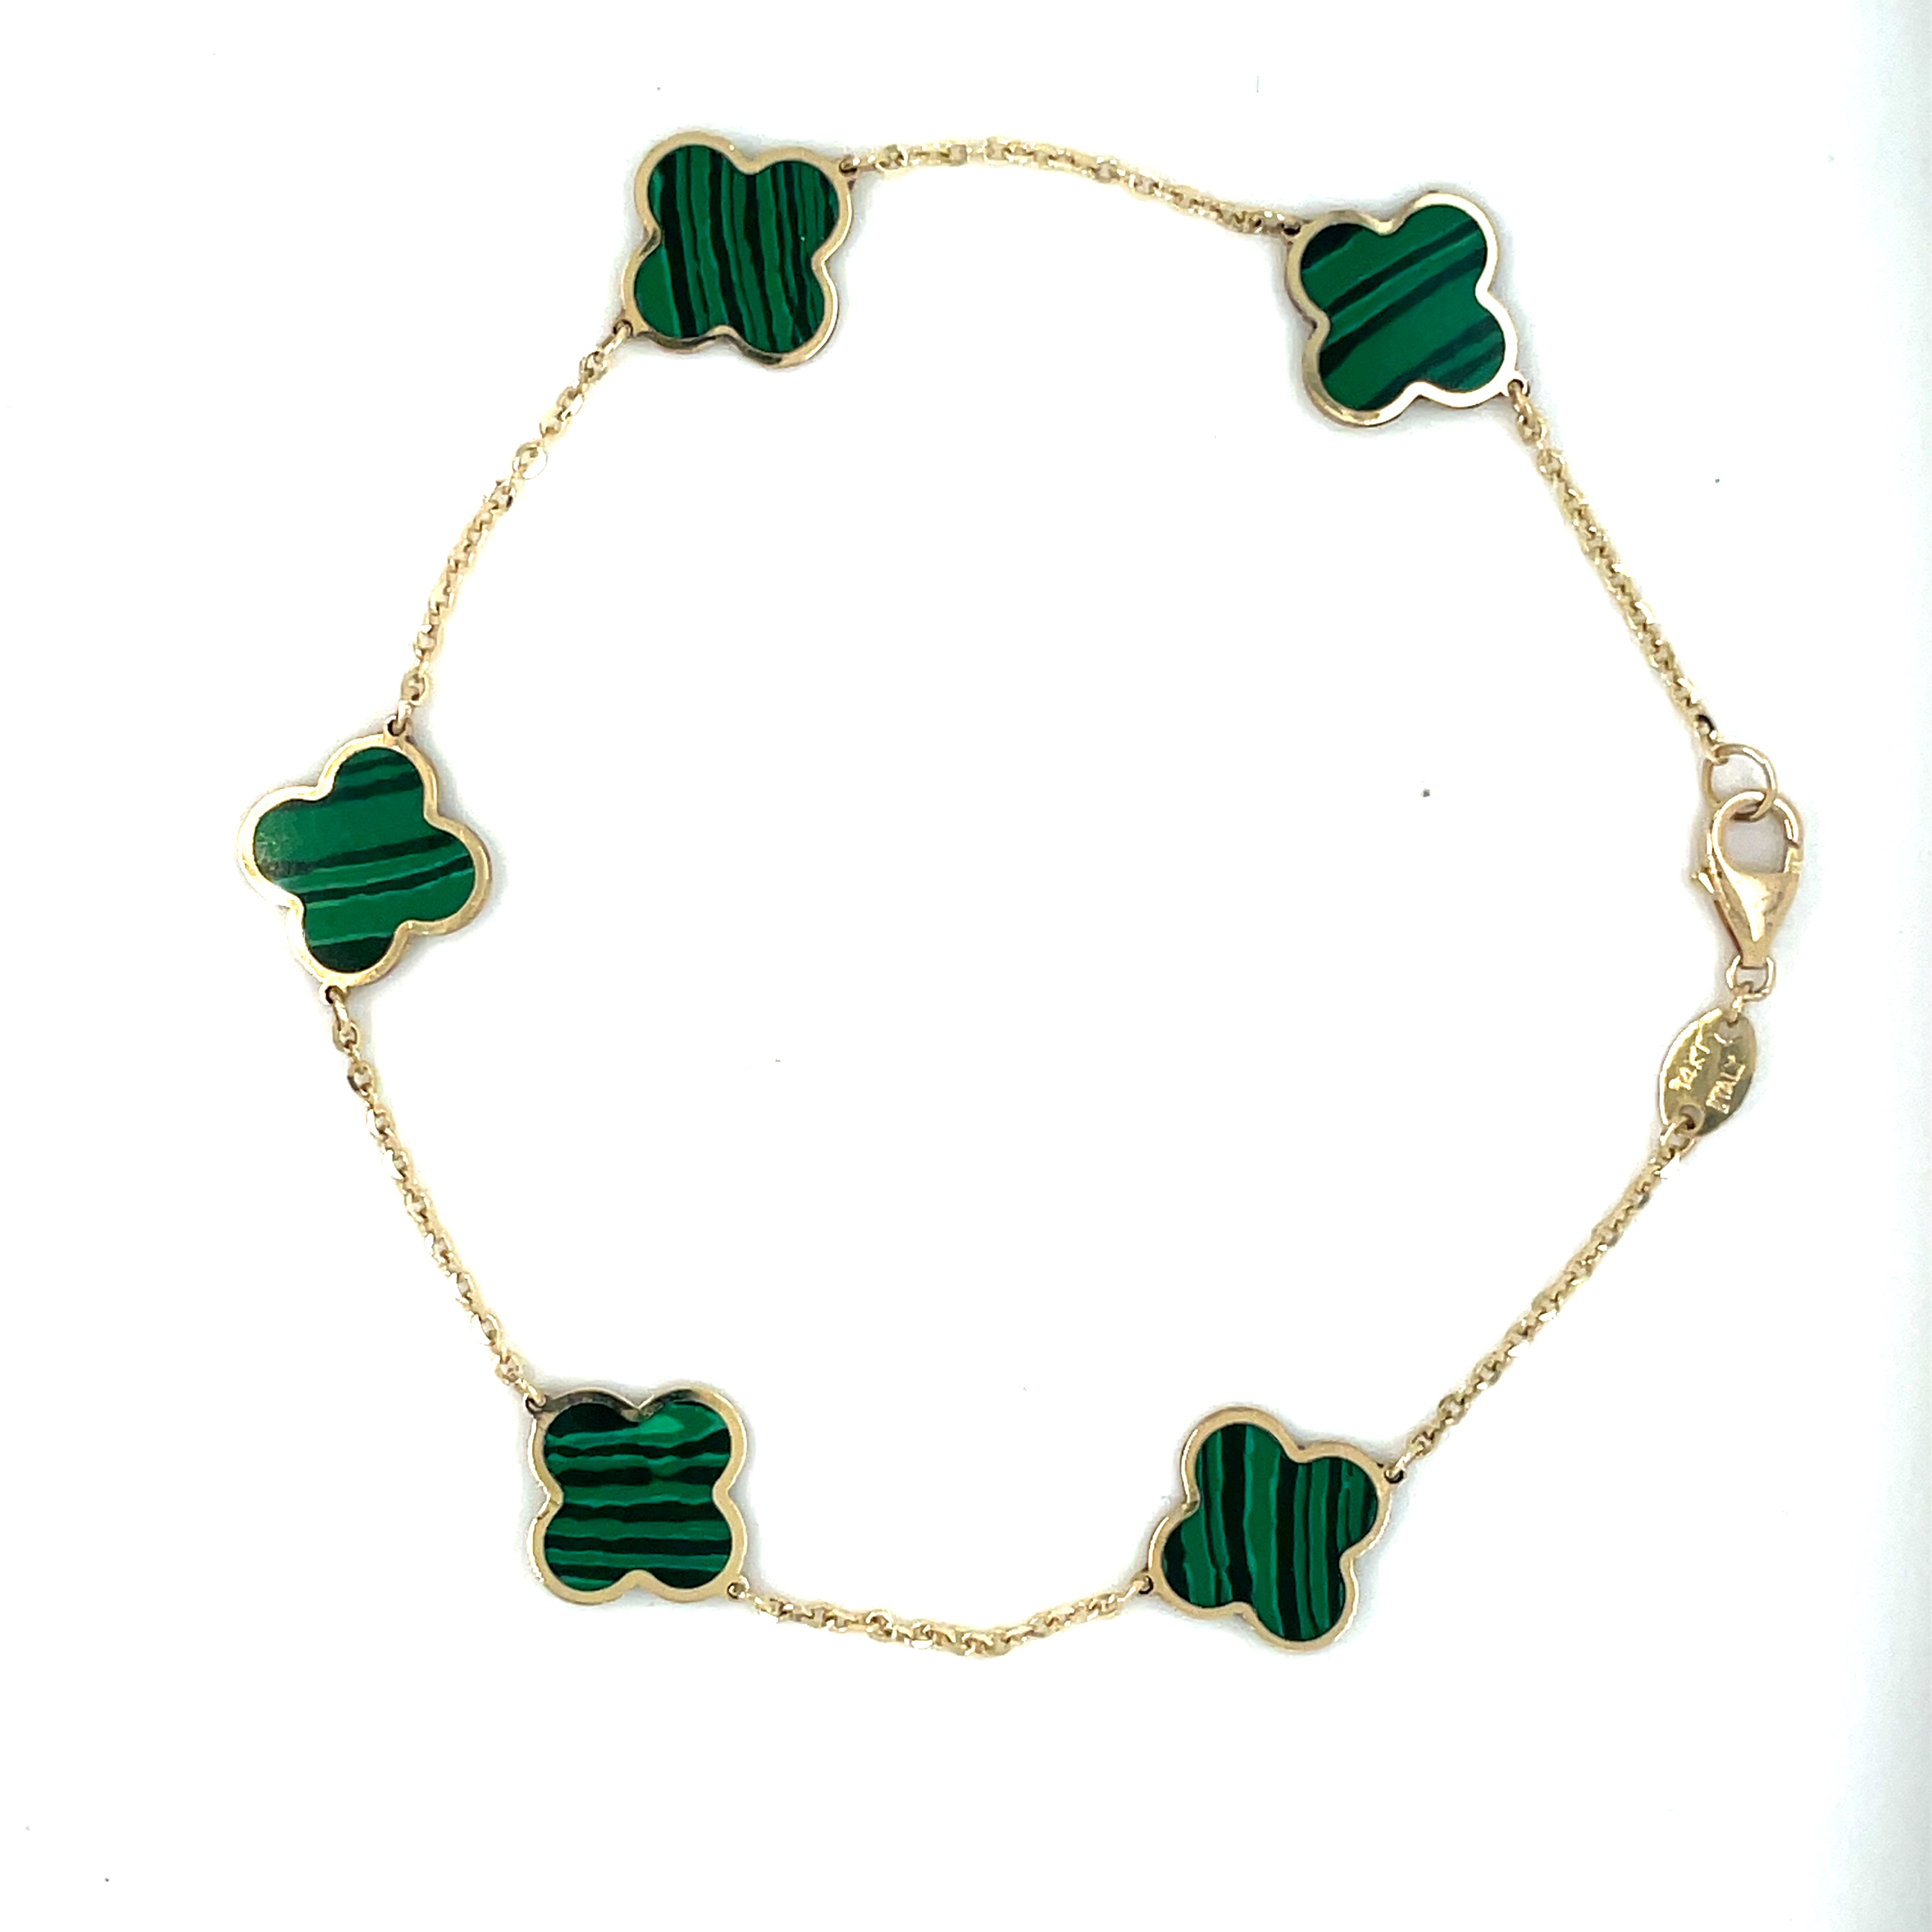 This elegant 14k yellow gold bracelet features five intricately detailed malachite clovers and a secure lobster clasp. The clovers measure 9.0 mm in size and the bracelet itself exudes sophistication and style.   